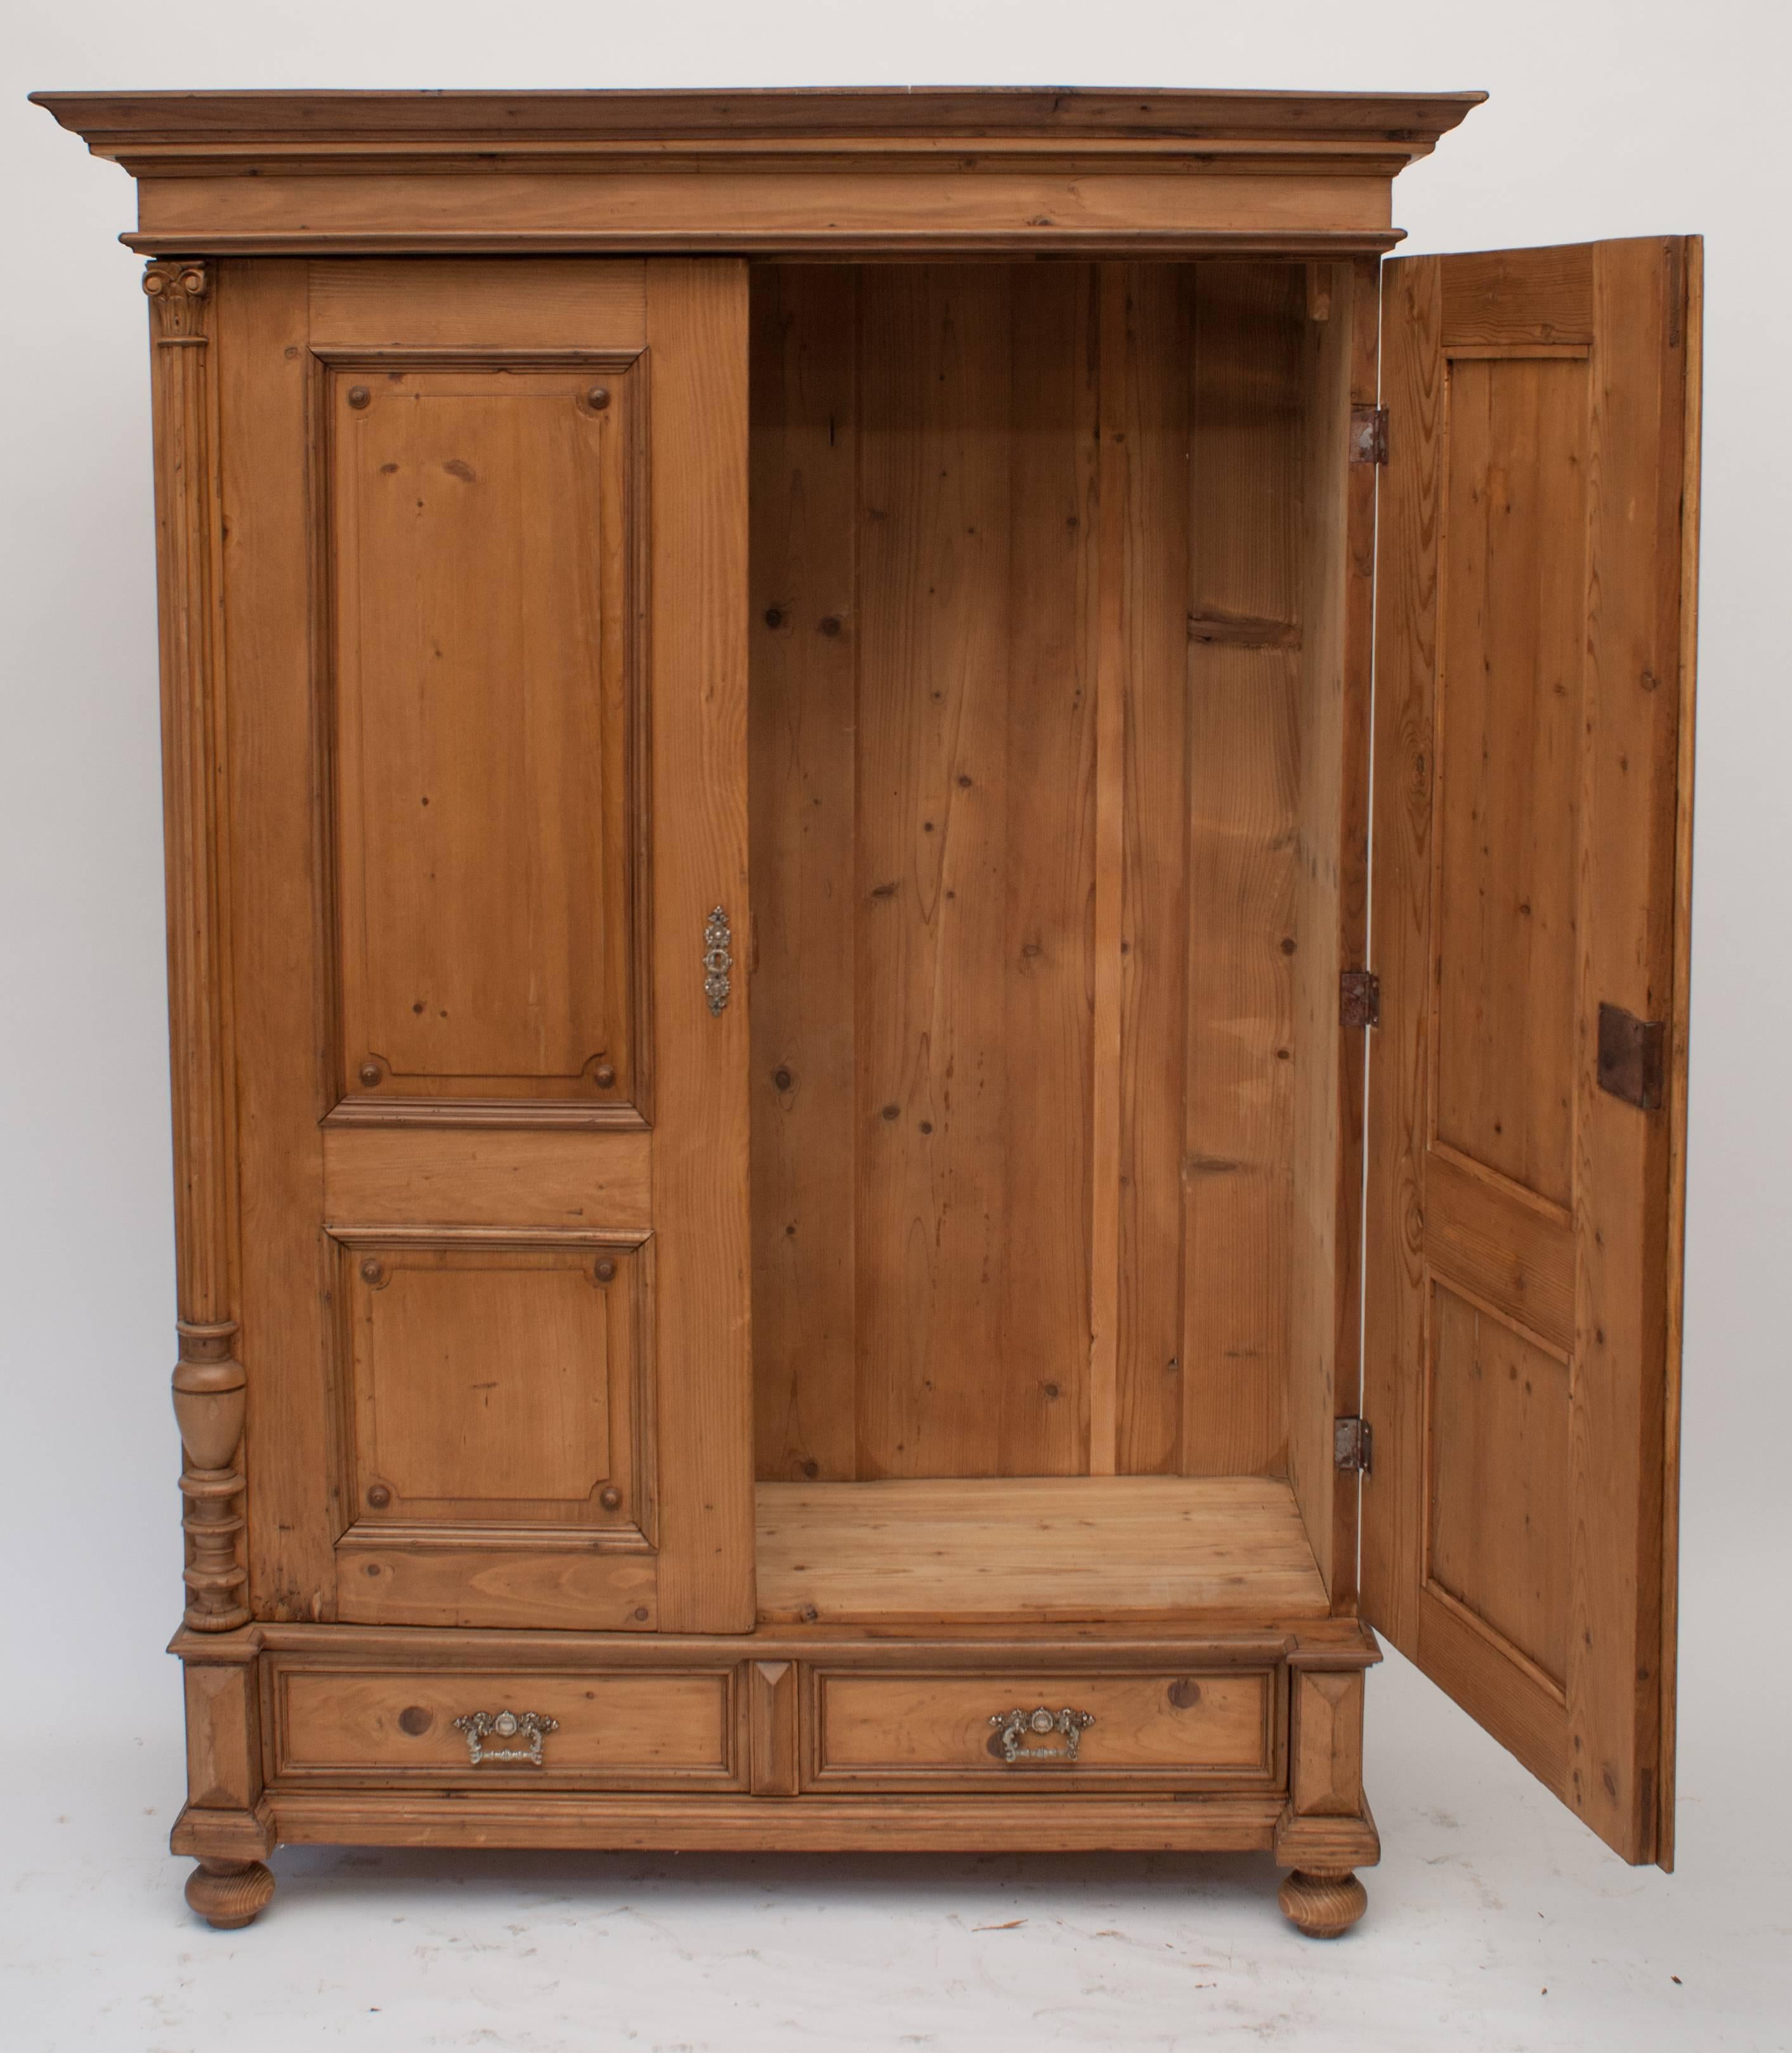 This lovely small pine armoire features a bold hardwood crown and Corinthian split balusters to the side of each wide-swinging door.  Each door has two raised panels with applied hardwood buttons in the corners.  There is a single beautifully hand